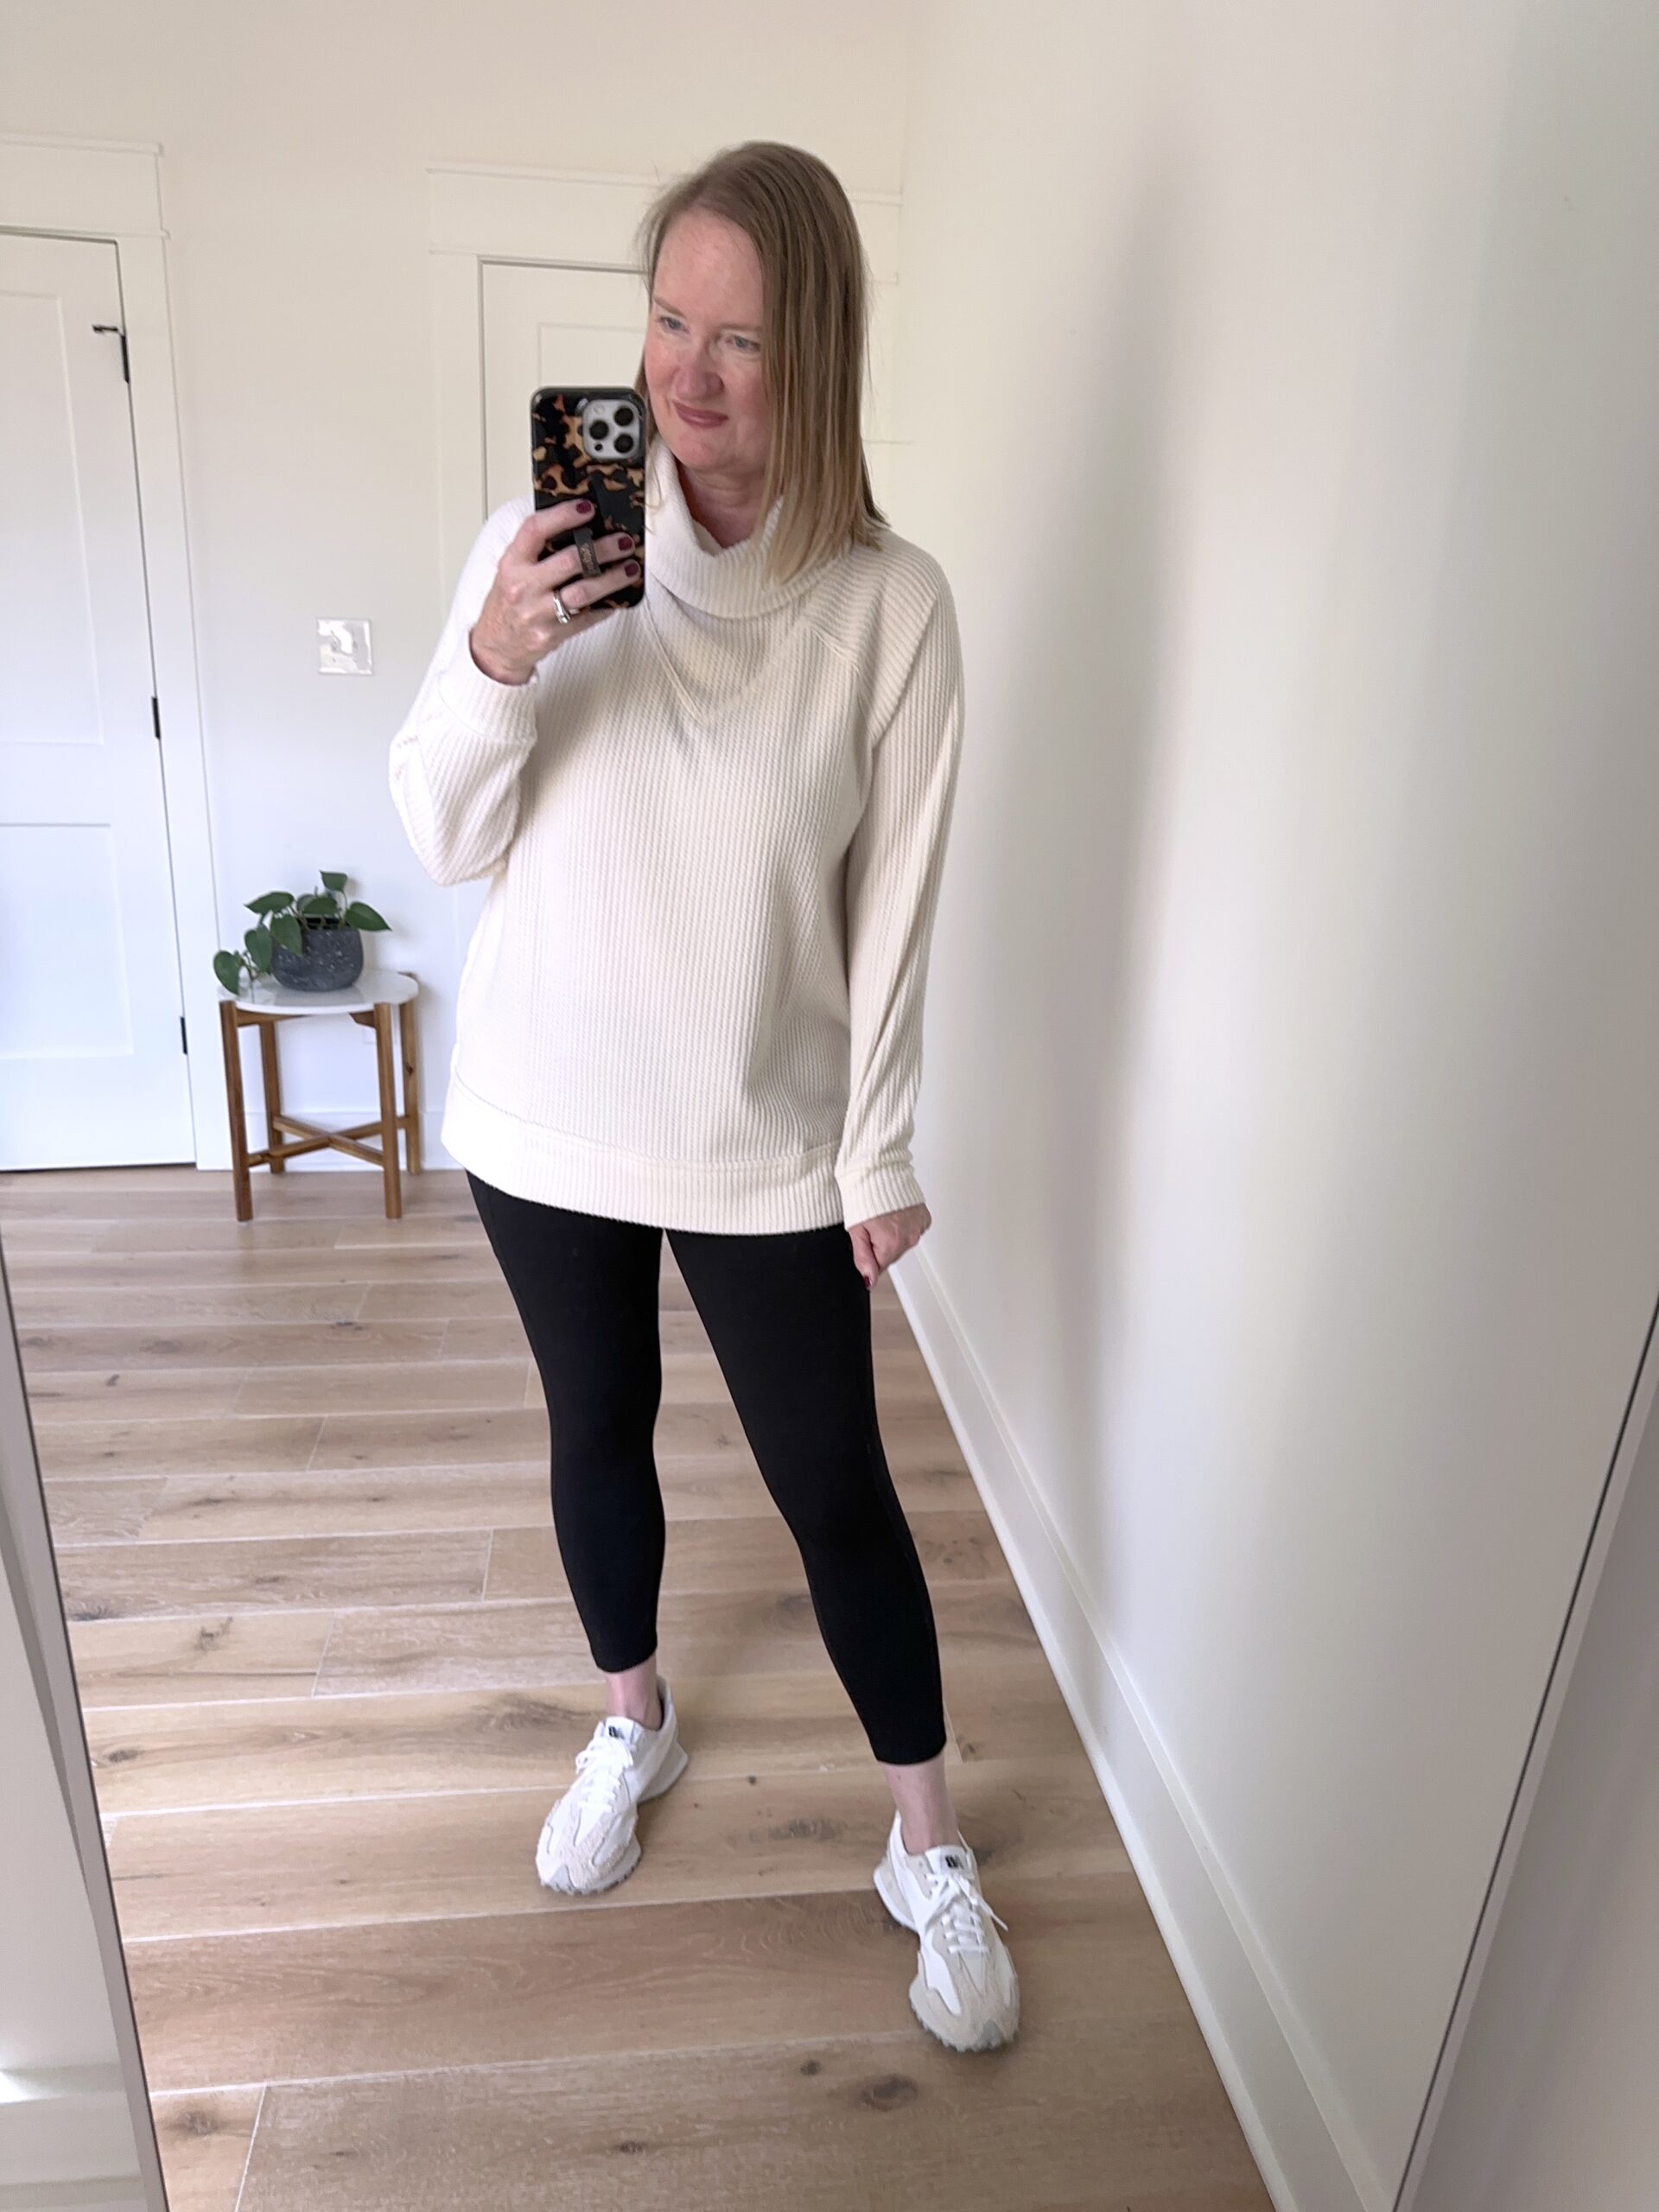 https://classyyettrendy.com/wp-content/uploads/2023/10/TRY-ON-SESSION-OCT-2023-Lou-Grey-Wafflestitch-Cowl-Neck-Tunic-Black-Ponte-Pocket-Leggings-New-Balance-327-Sneakers-1a-scaled.jpg